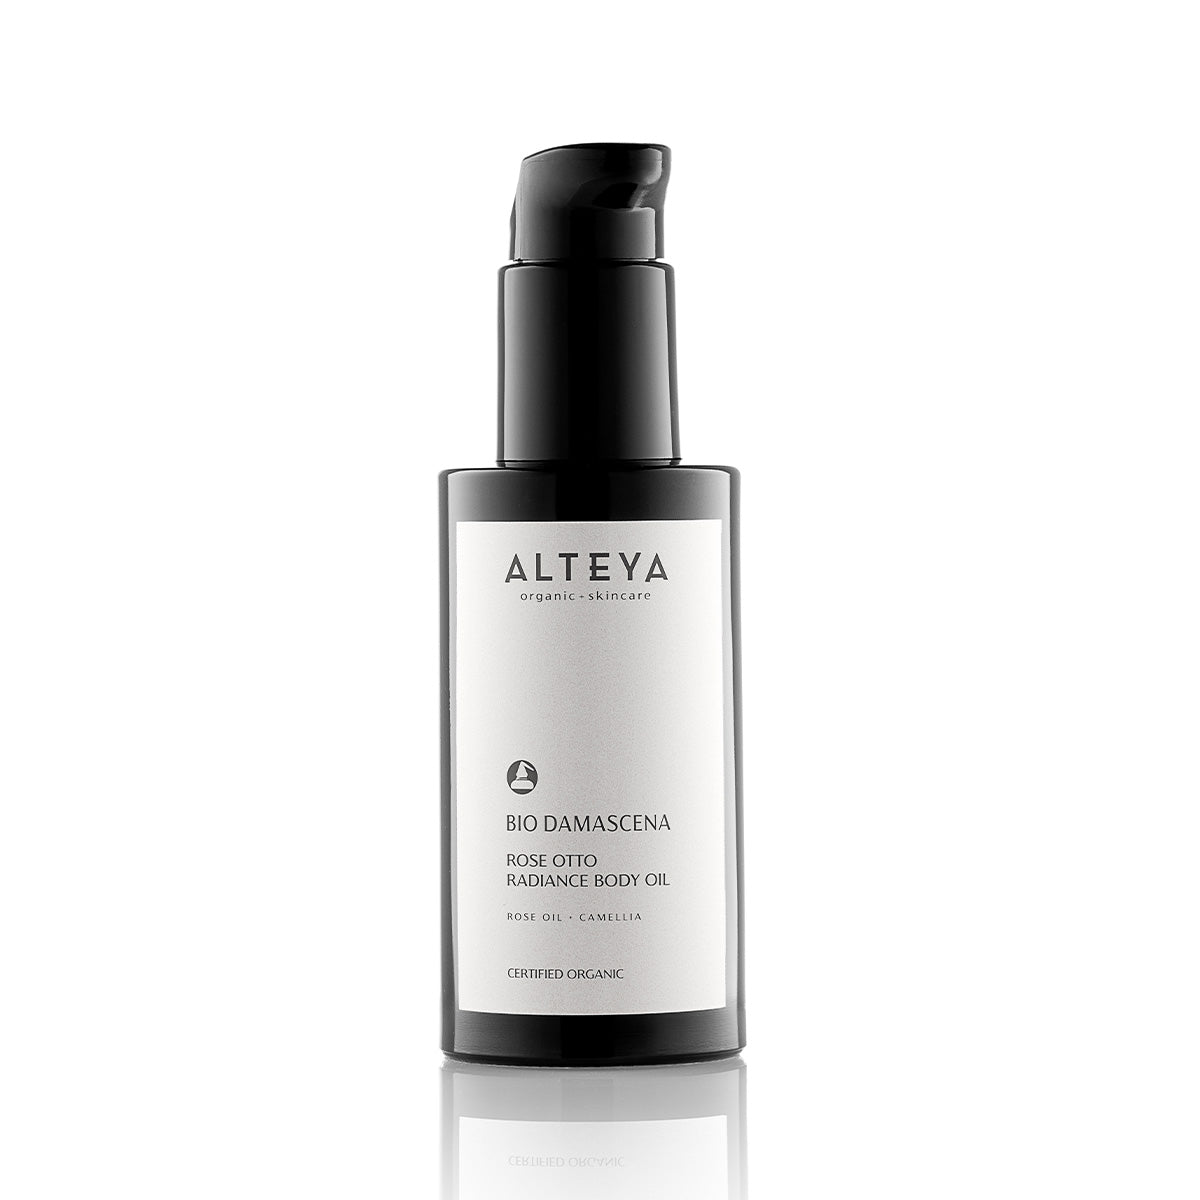 A bottle of Alteya Organics Bio Damascena Rose Otto Radiance Body Oil, enriched with essential nutrients for healthy skin, displayed on a clean white background.